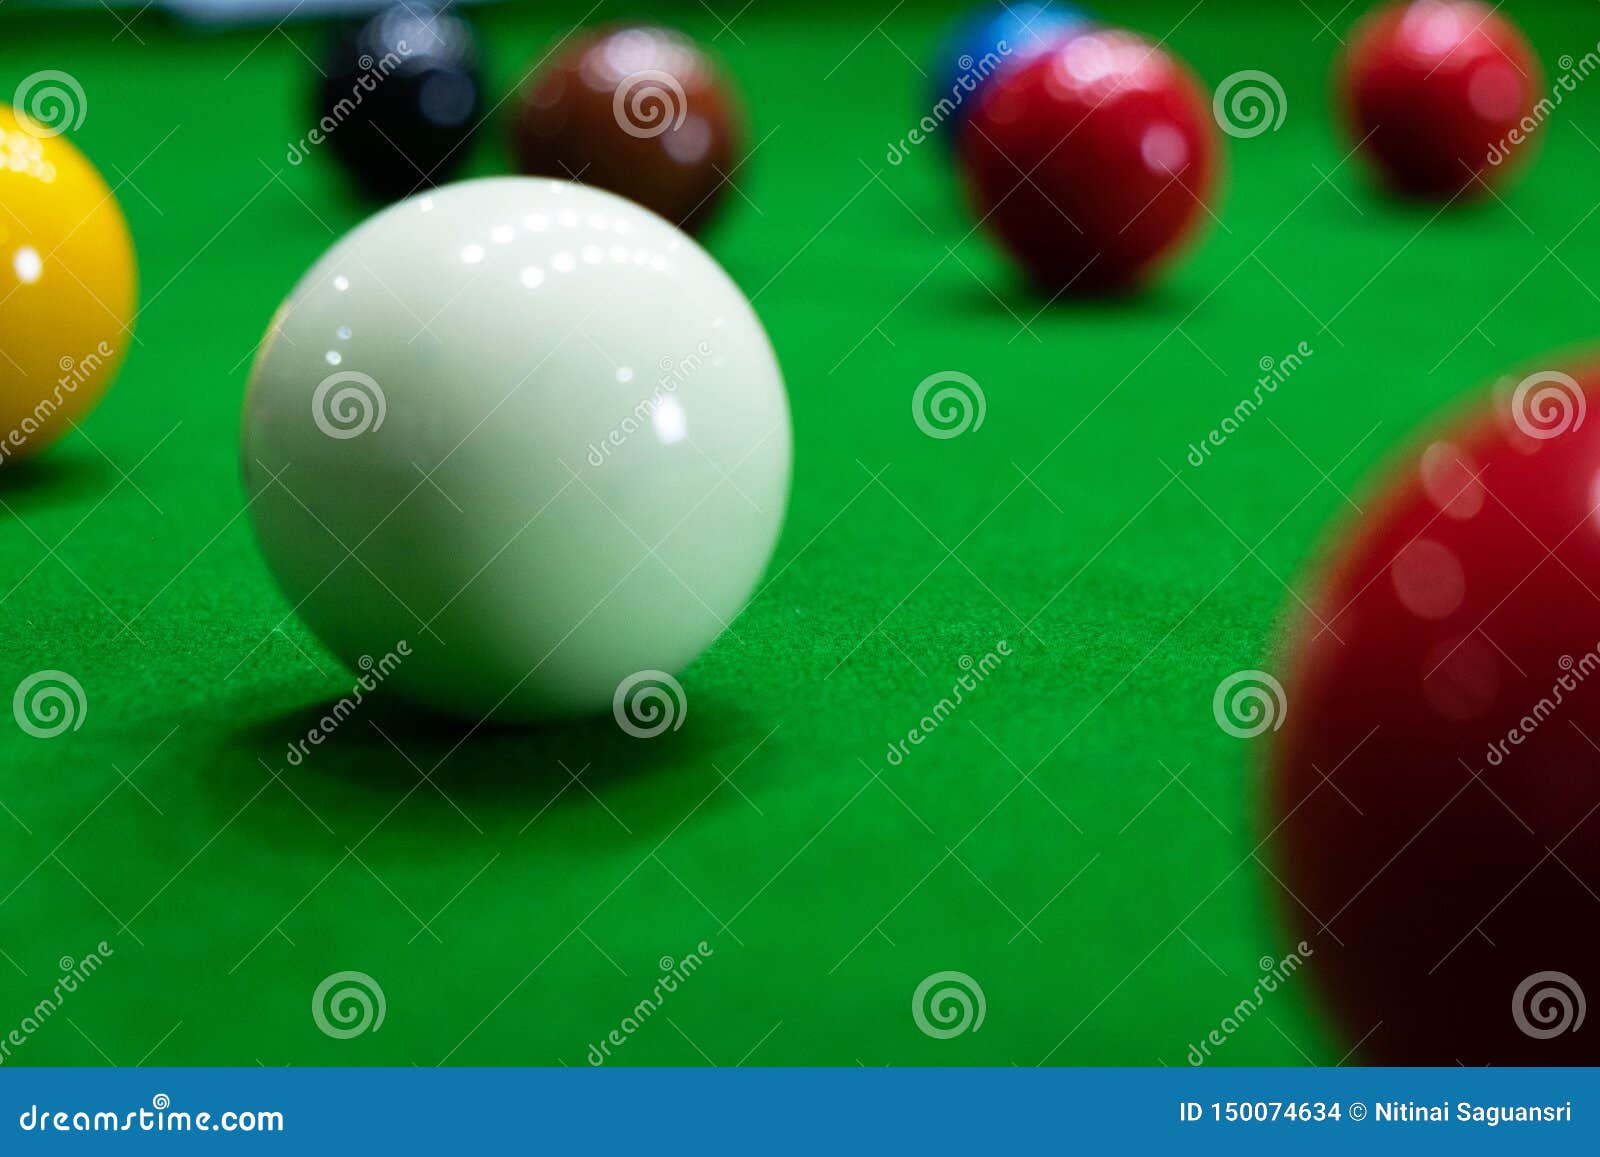 Playing Snooker, Piercing the Red Ball, Black, Aiming the Ball and Pocketing the Hole To Score Points Stock Photo